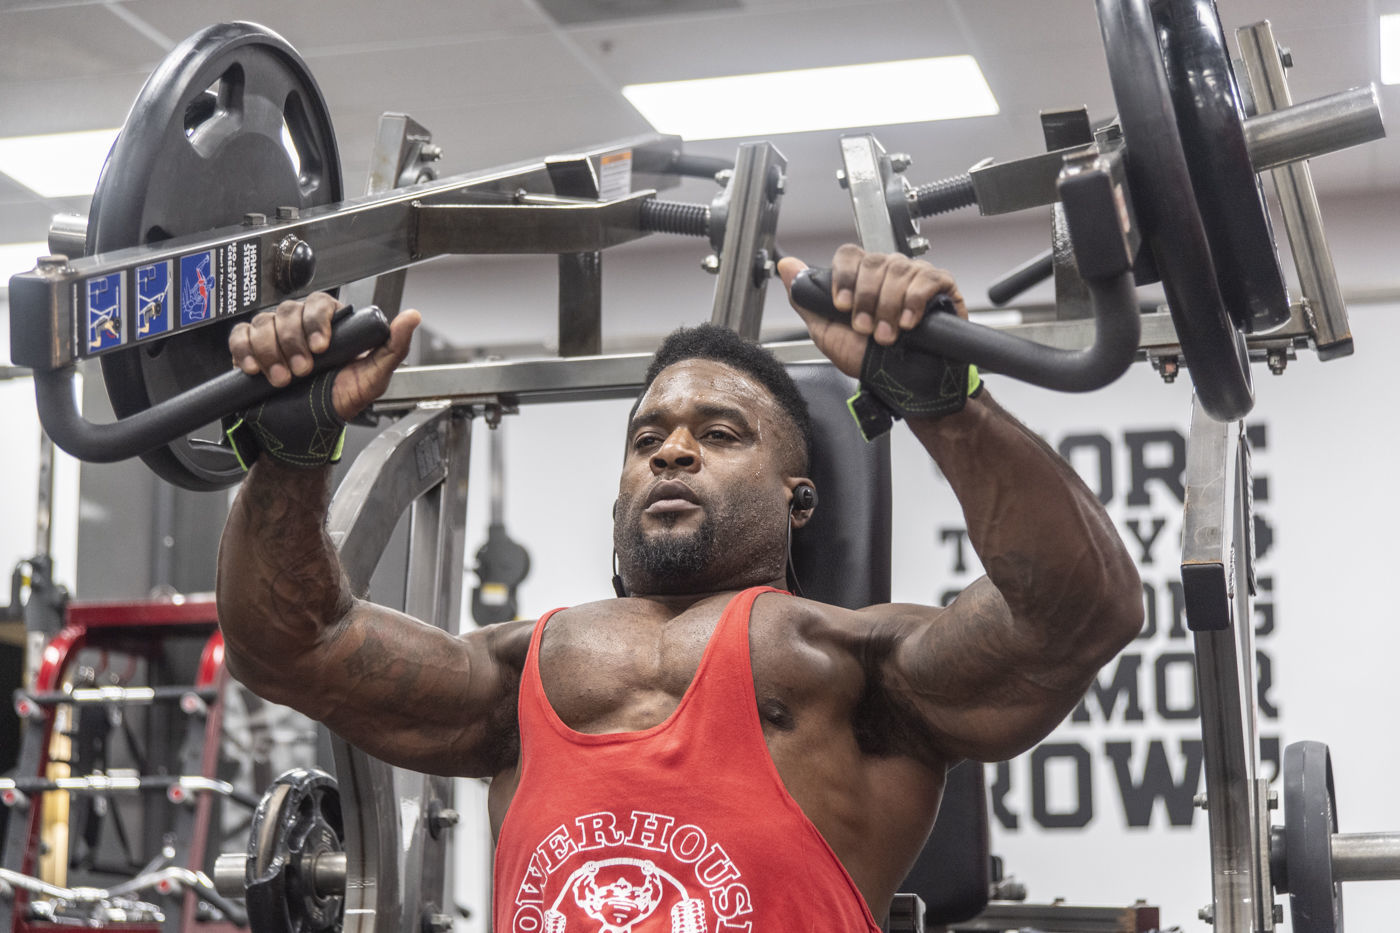 Bodybuilder set to take it to next level Sports thefacts